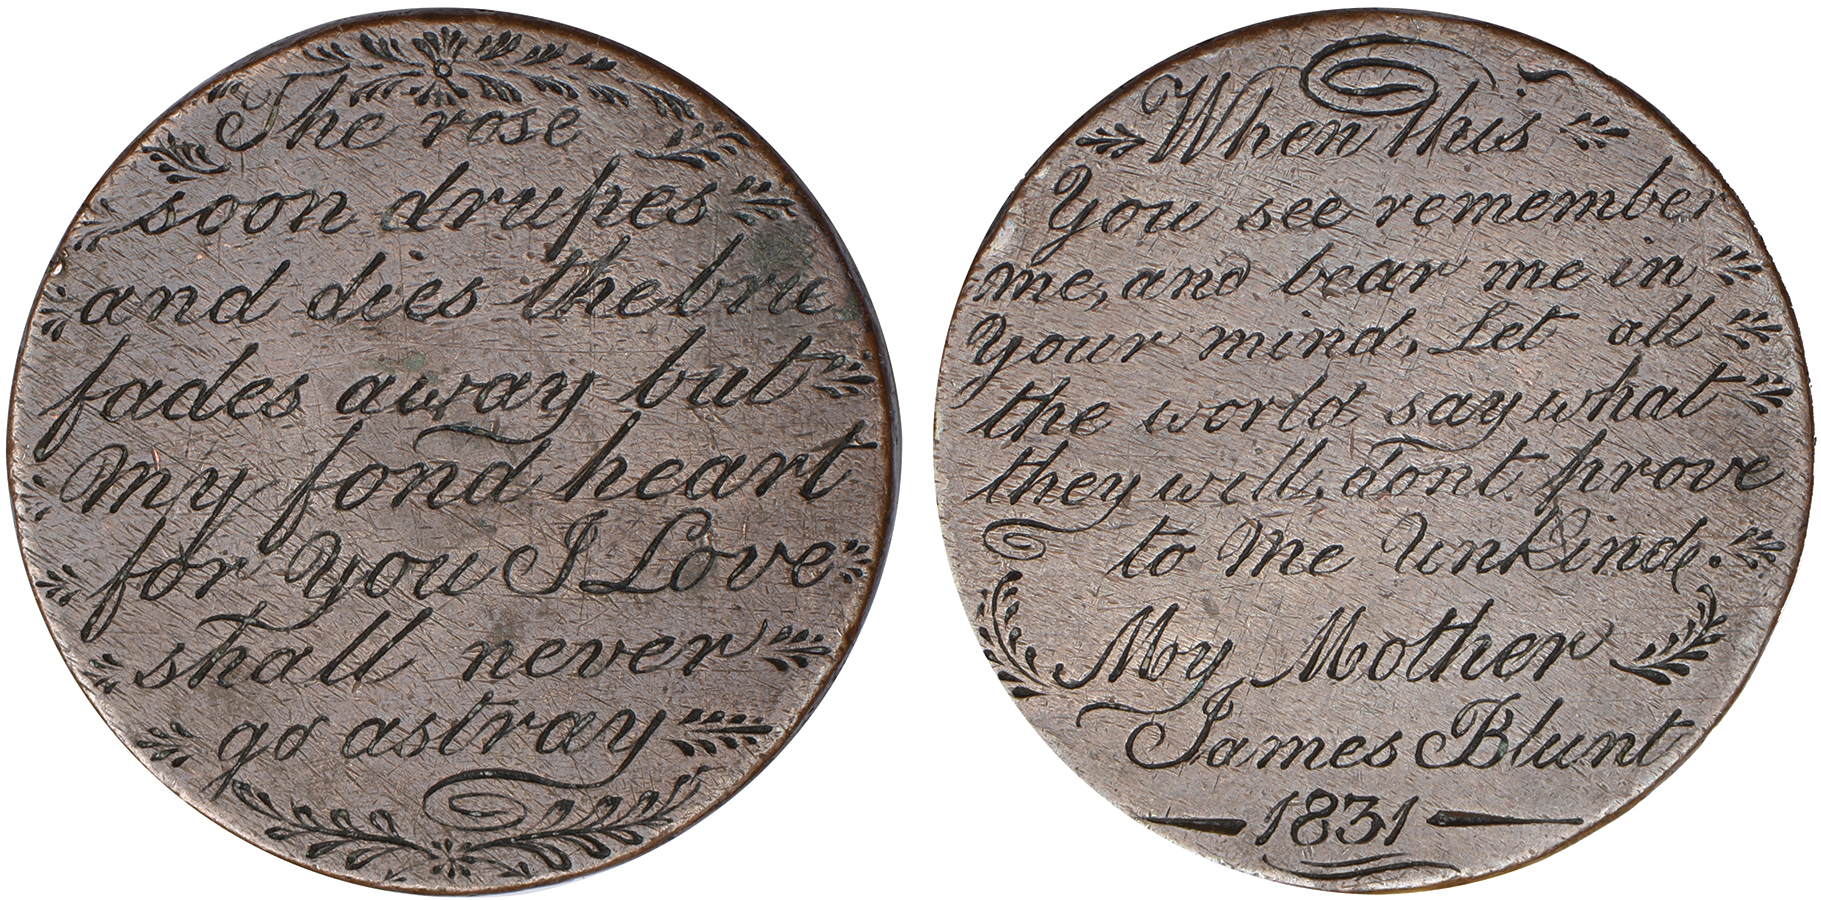 James Blunt, a Georgian penny, smoothed and engraved both sides with legends: ‘When this you see